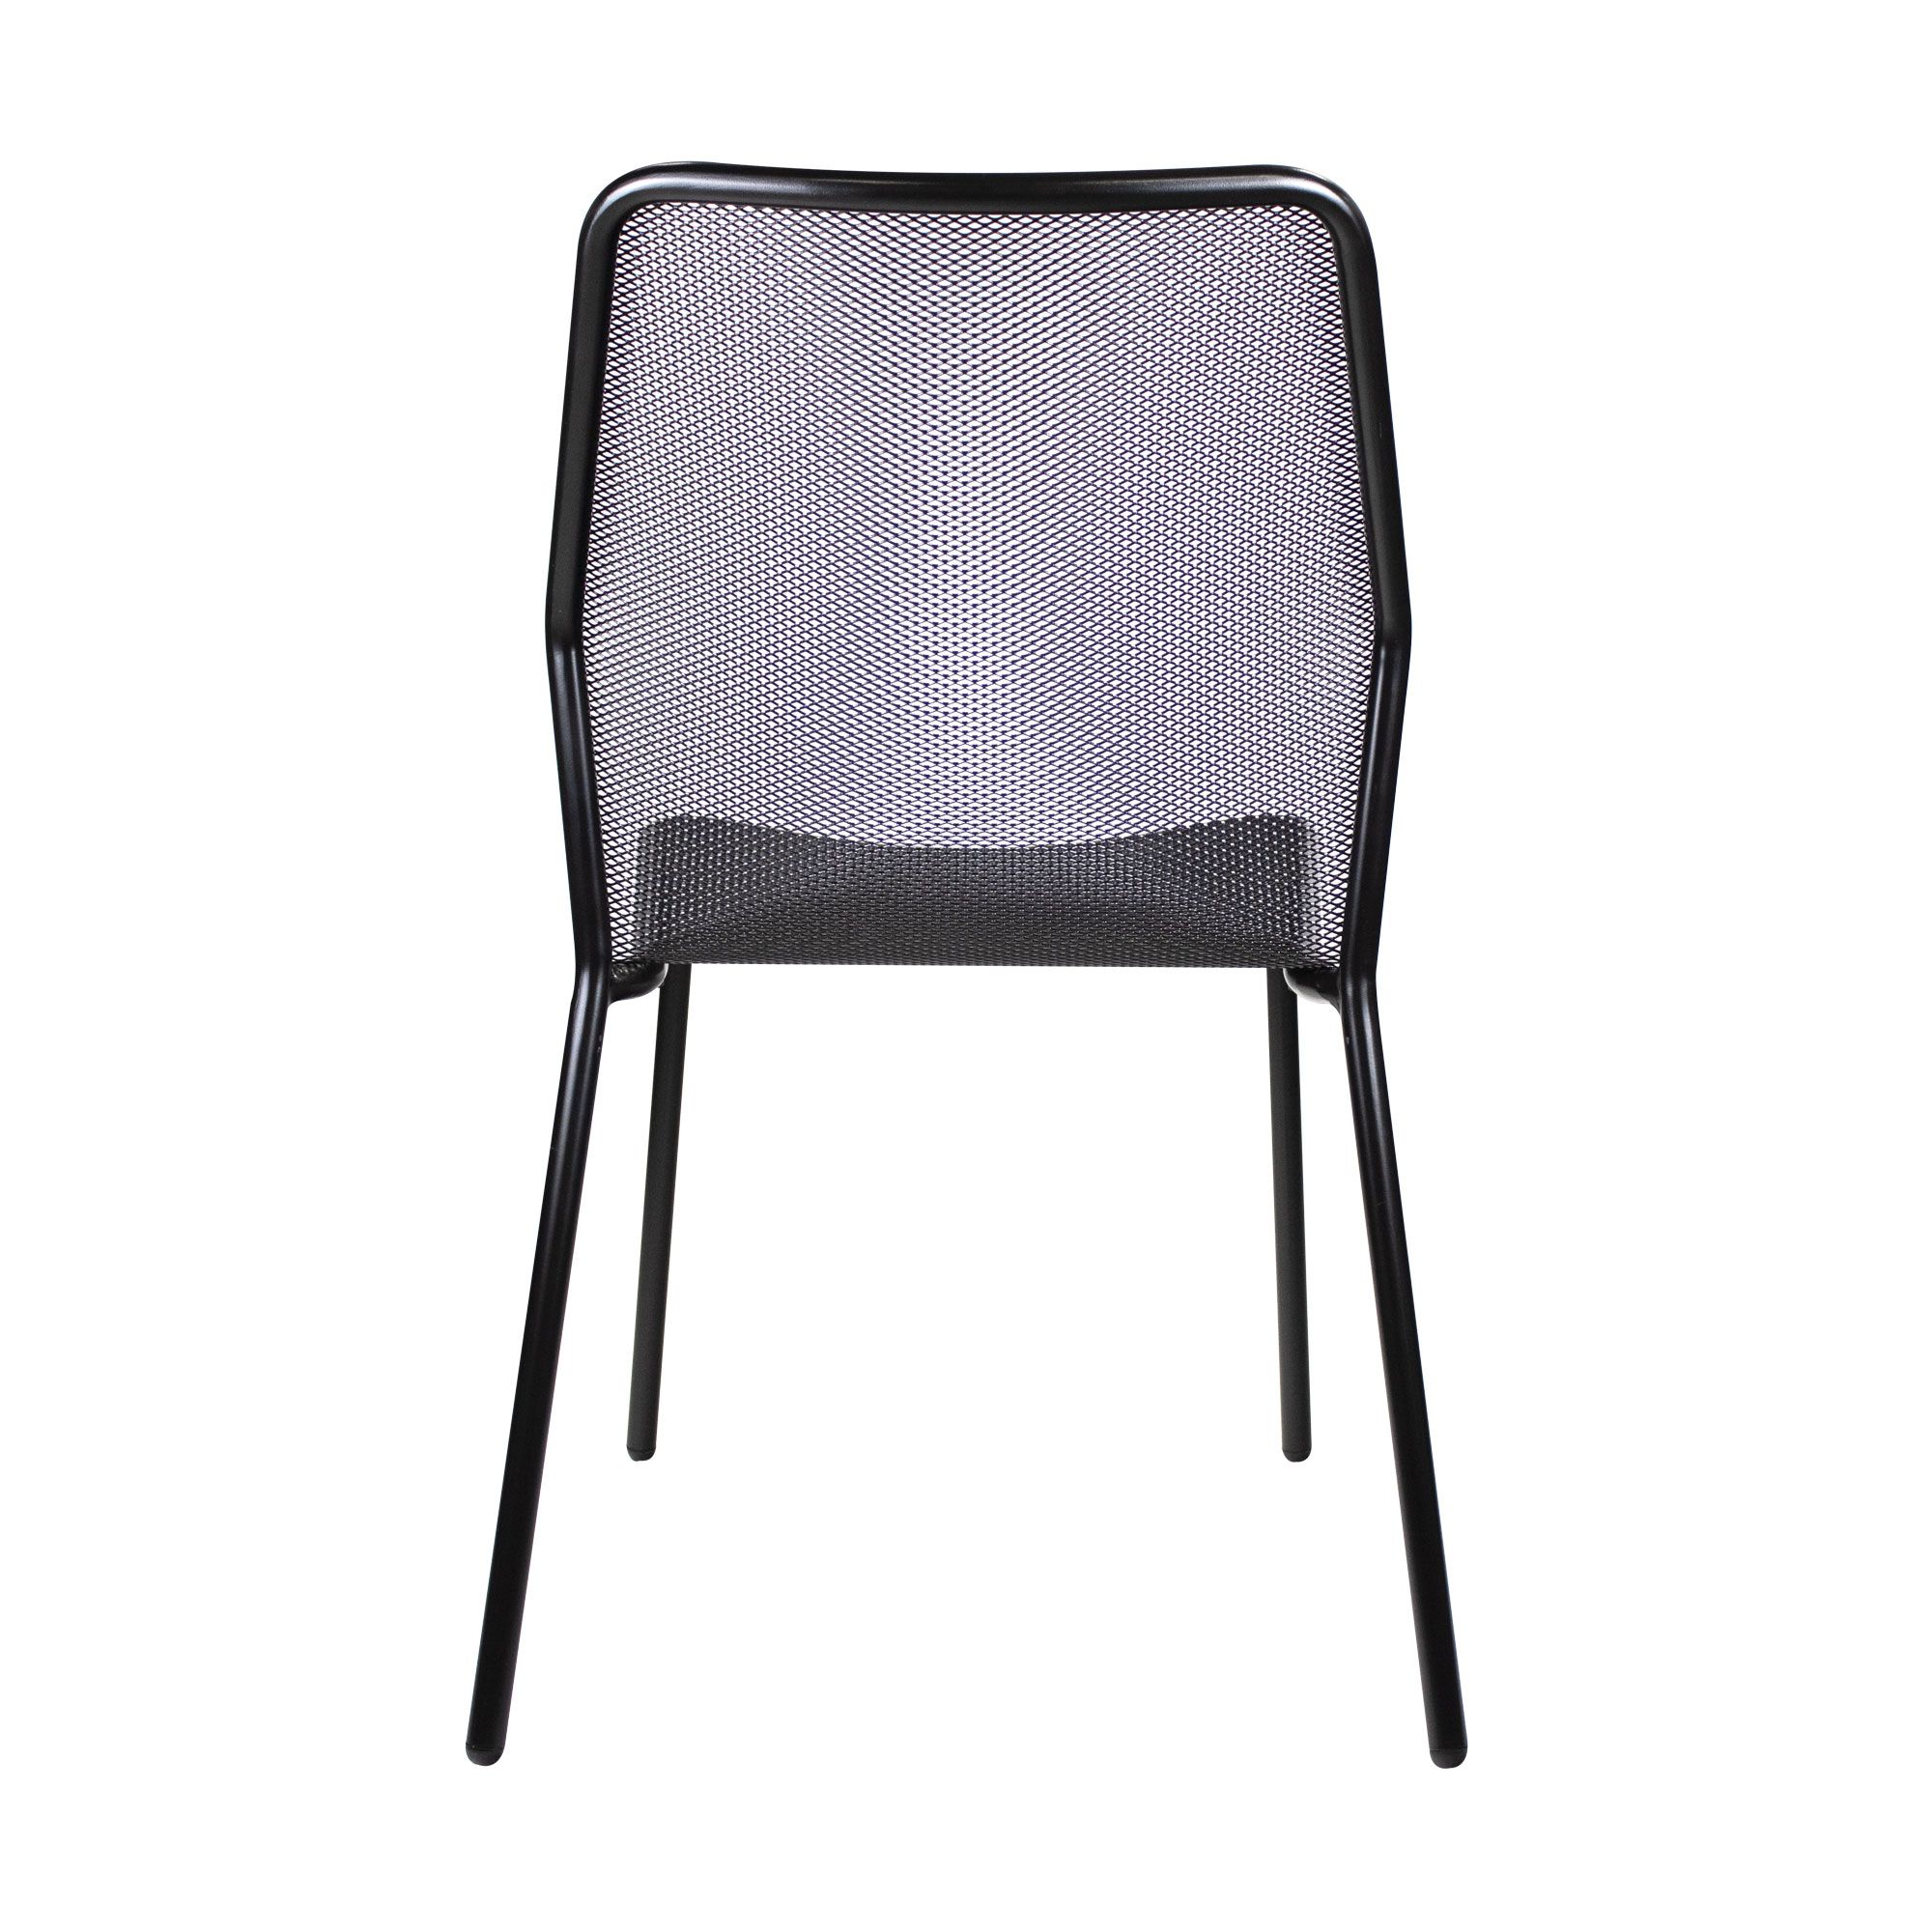 Black Nova Stackable Chair for Indoor and Outdoor Use - Back View